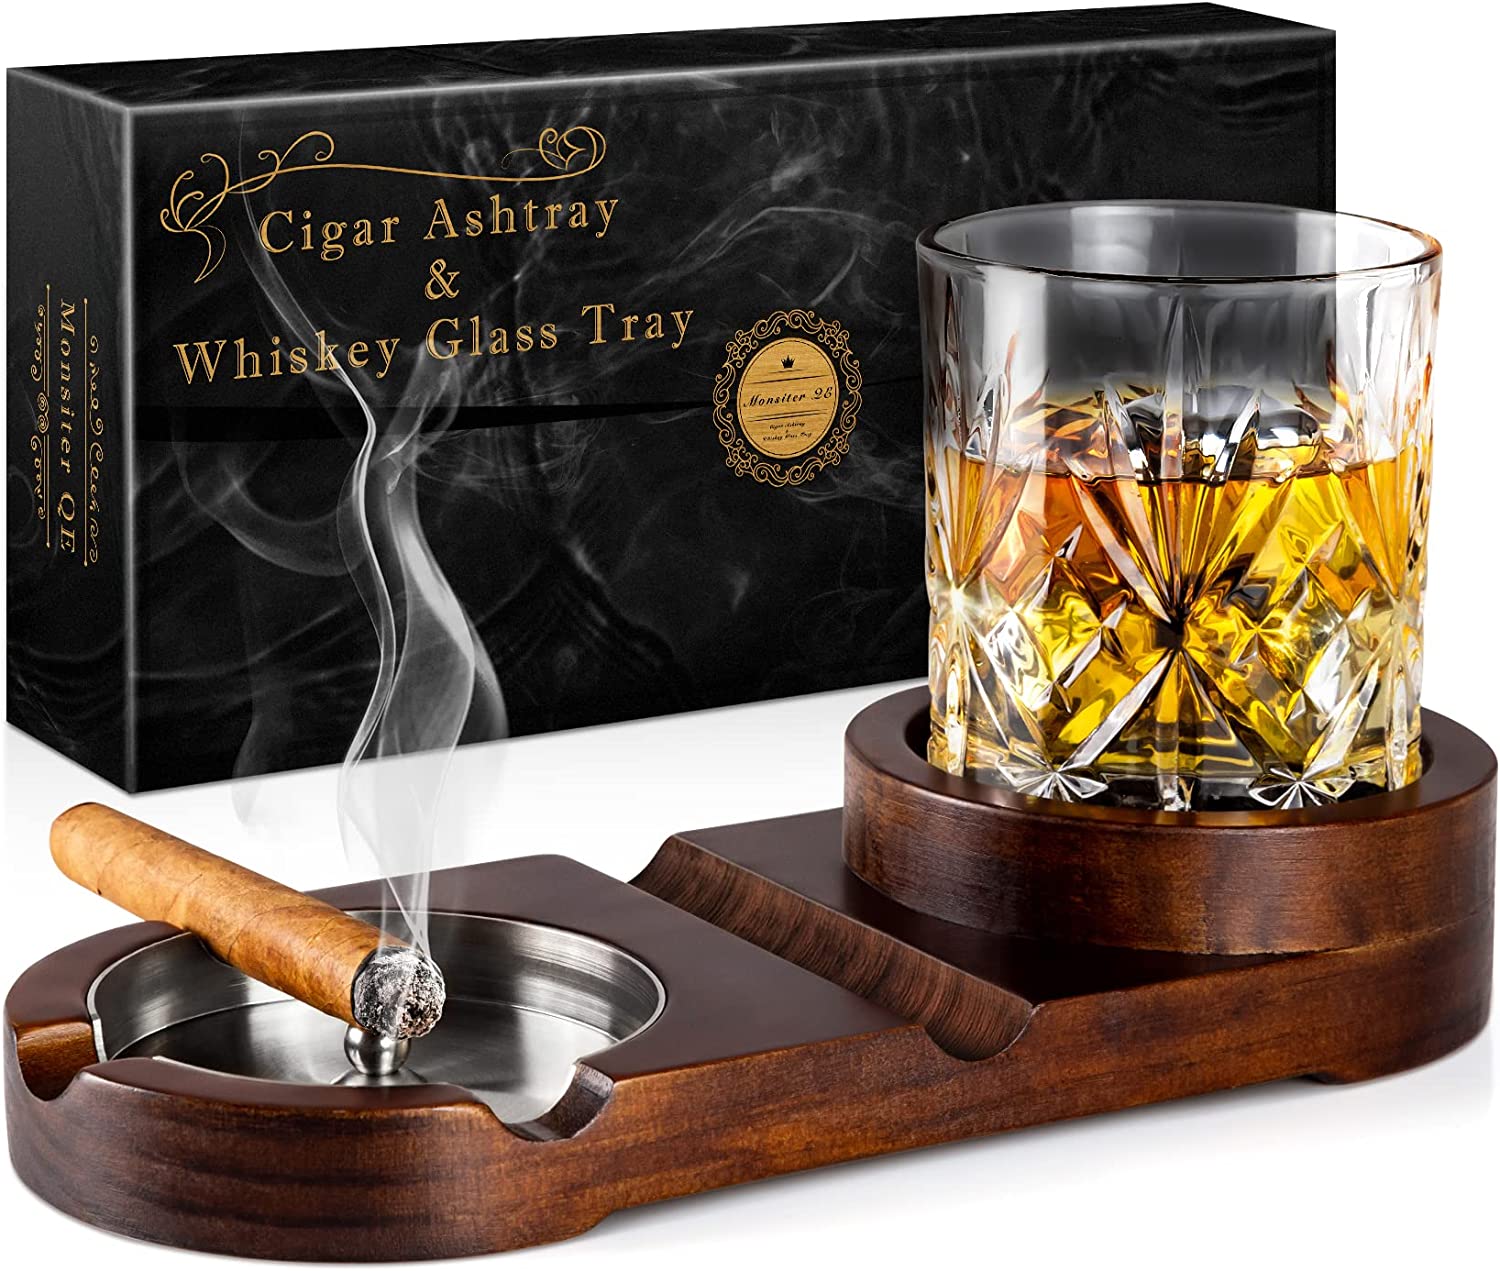 Ashtrays, Whiskey Glass Tray and Cigar Holder for Indoor Outdoor, Wooden Ash Tray Detachable Ashtray for Cigarettes, Cigar Accessories Decor for Home Office Cigar Gifts for Men